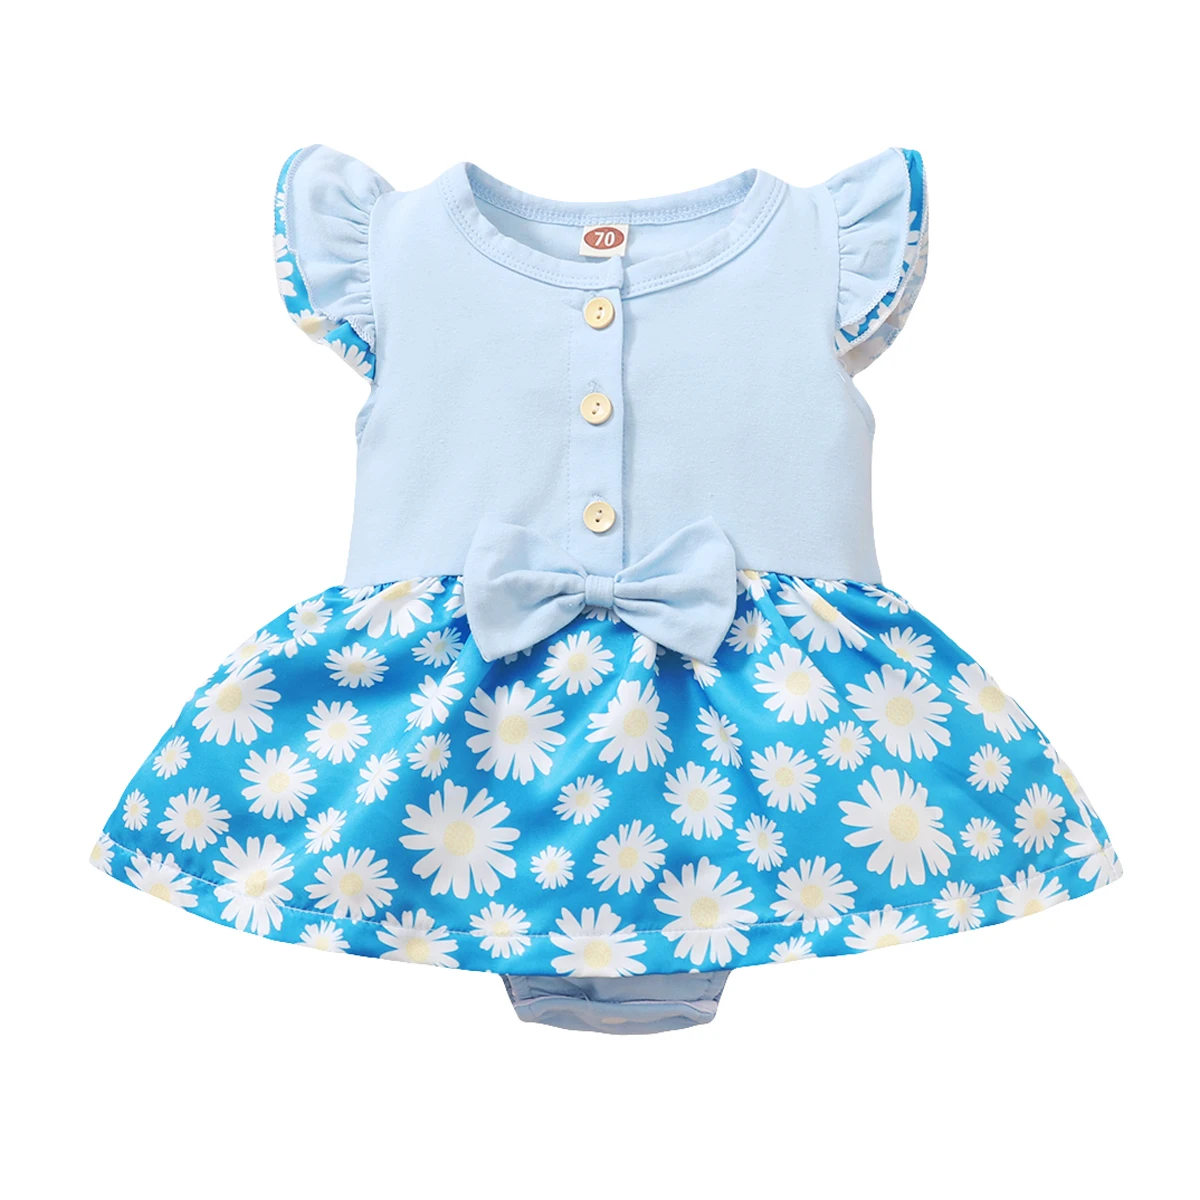 

OPPERIAYA Kids Baby Girls Summer Round Neck Button Casual Bodysuit Cute Fly Sleeve Bow Front Daisy Print Tutu Ruffle Jumpsuit